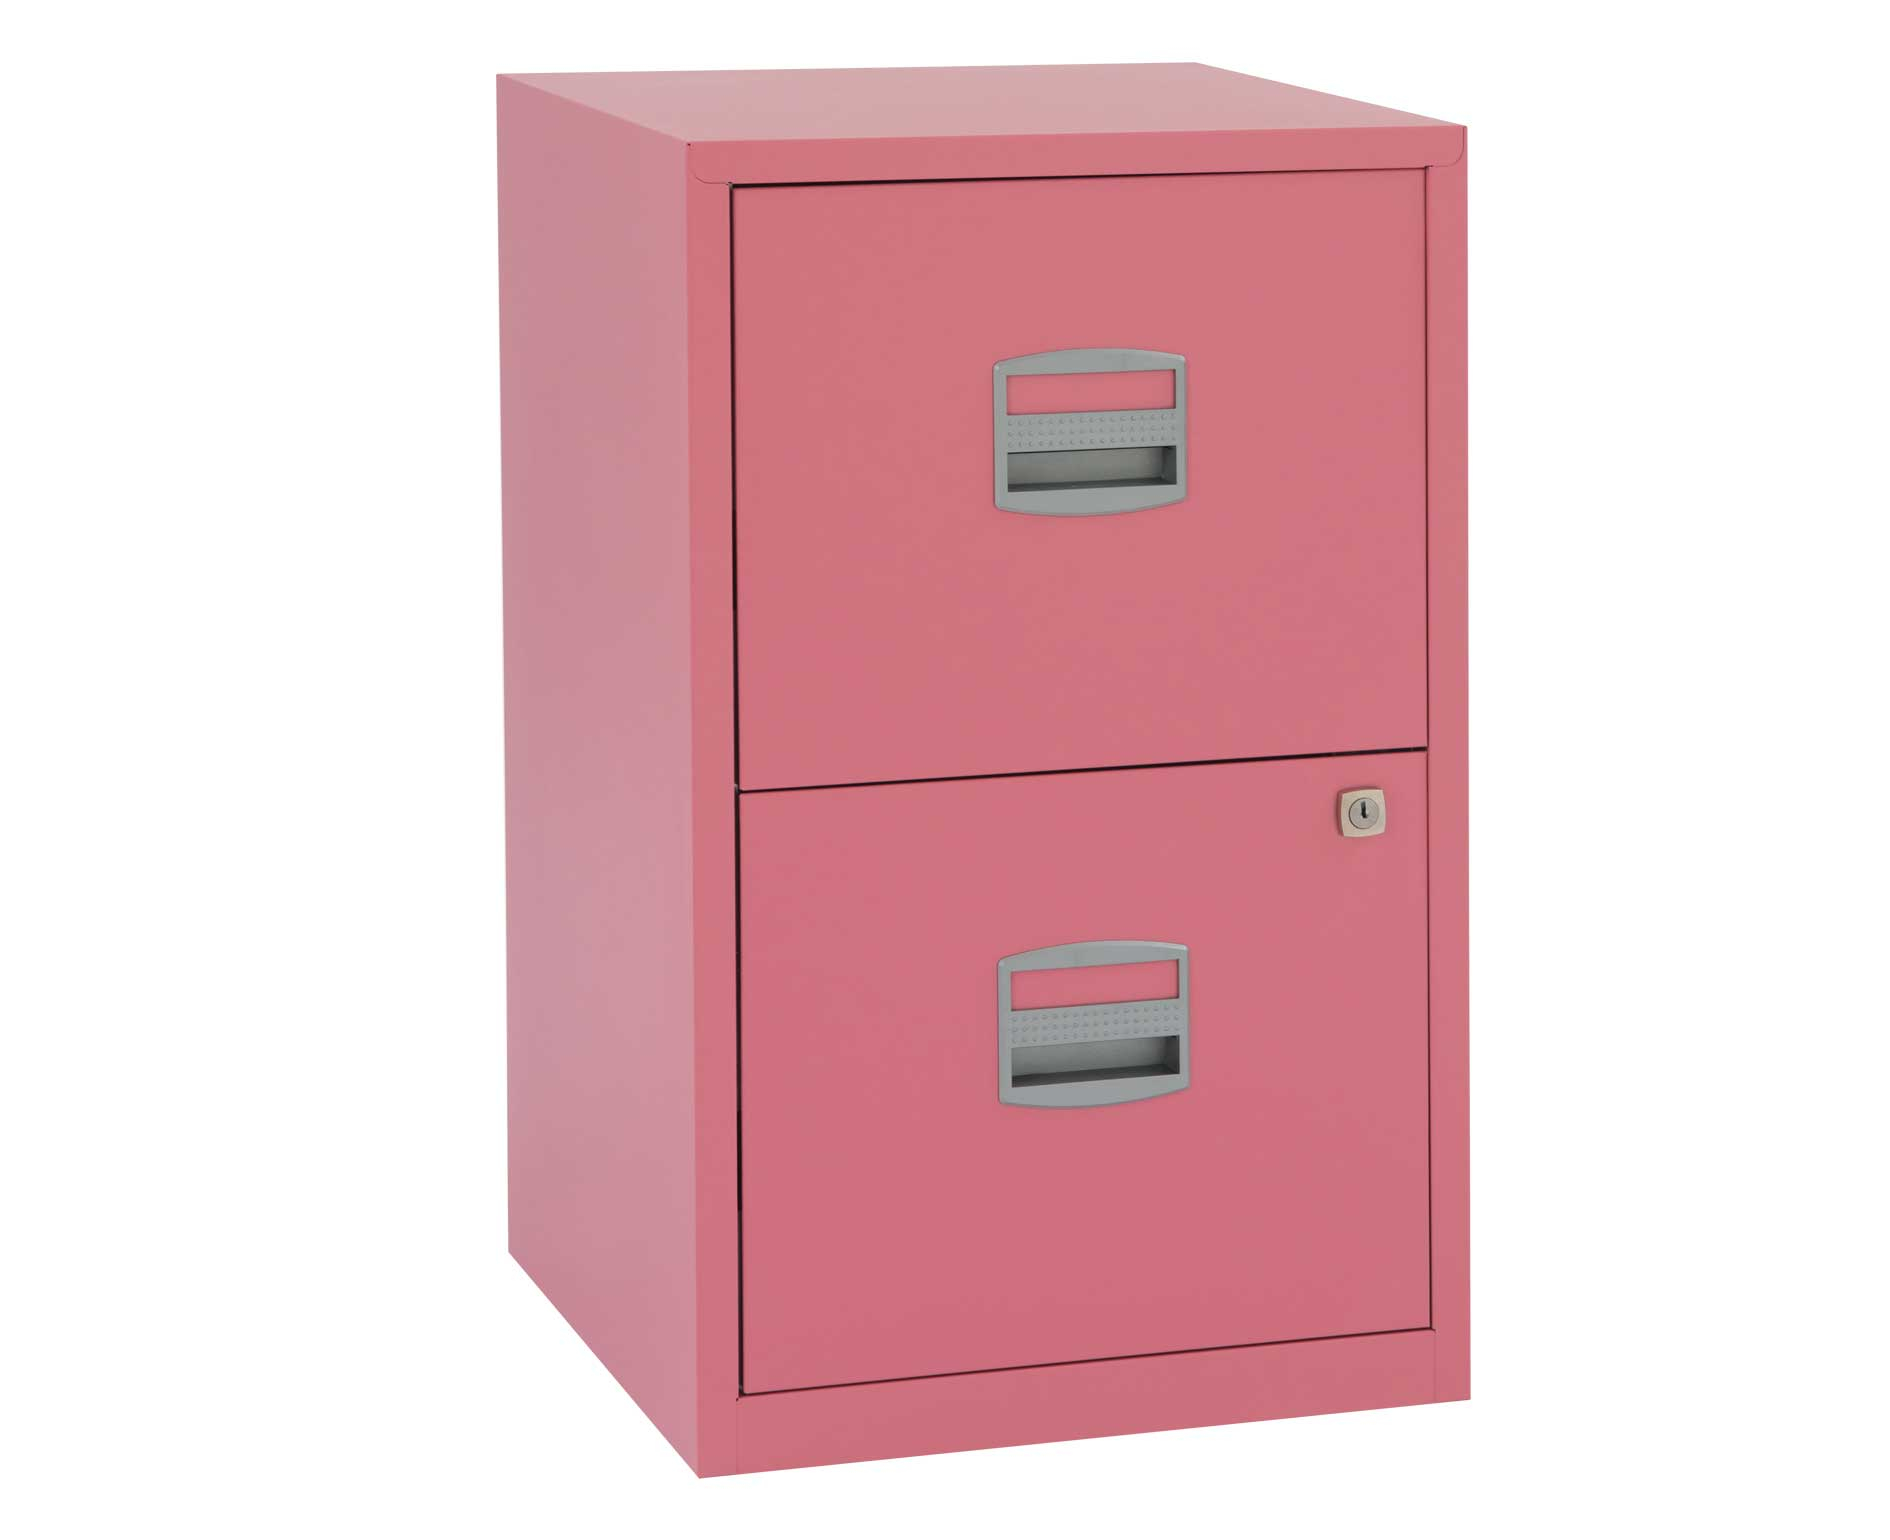 Pink Filing Cabinets Storage Shelving Furniture Storage Ryman intended for proportions 1890 X 1540